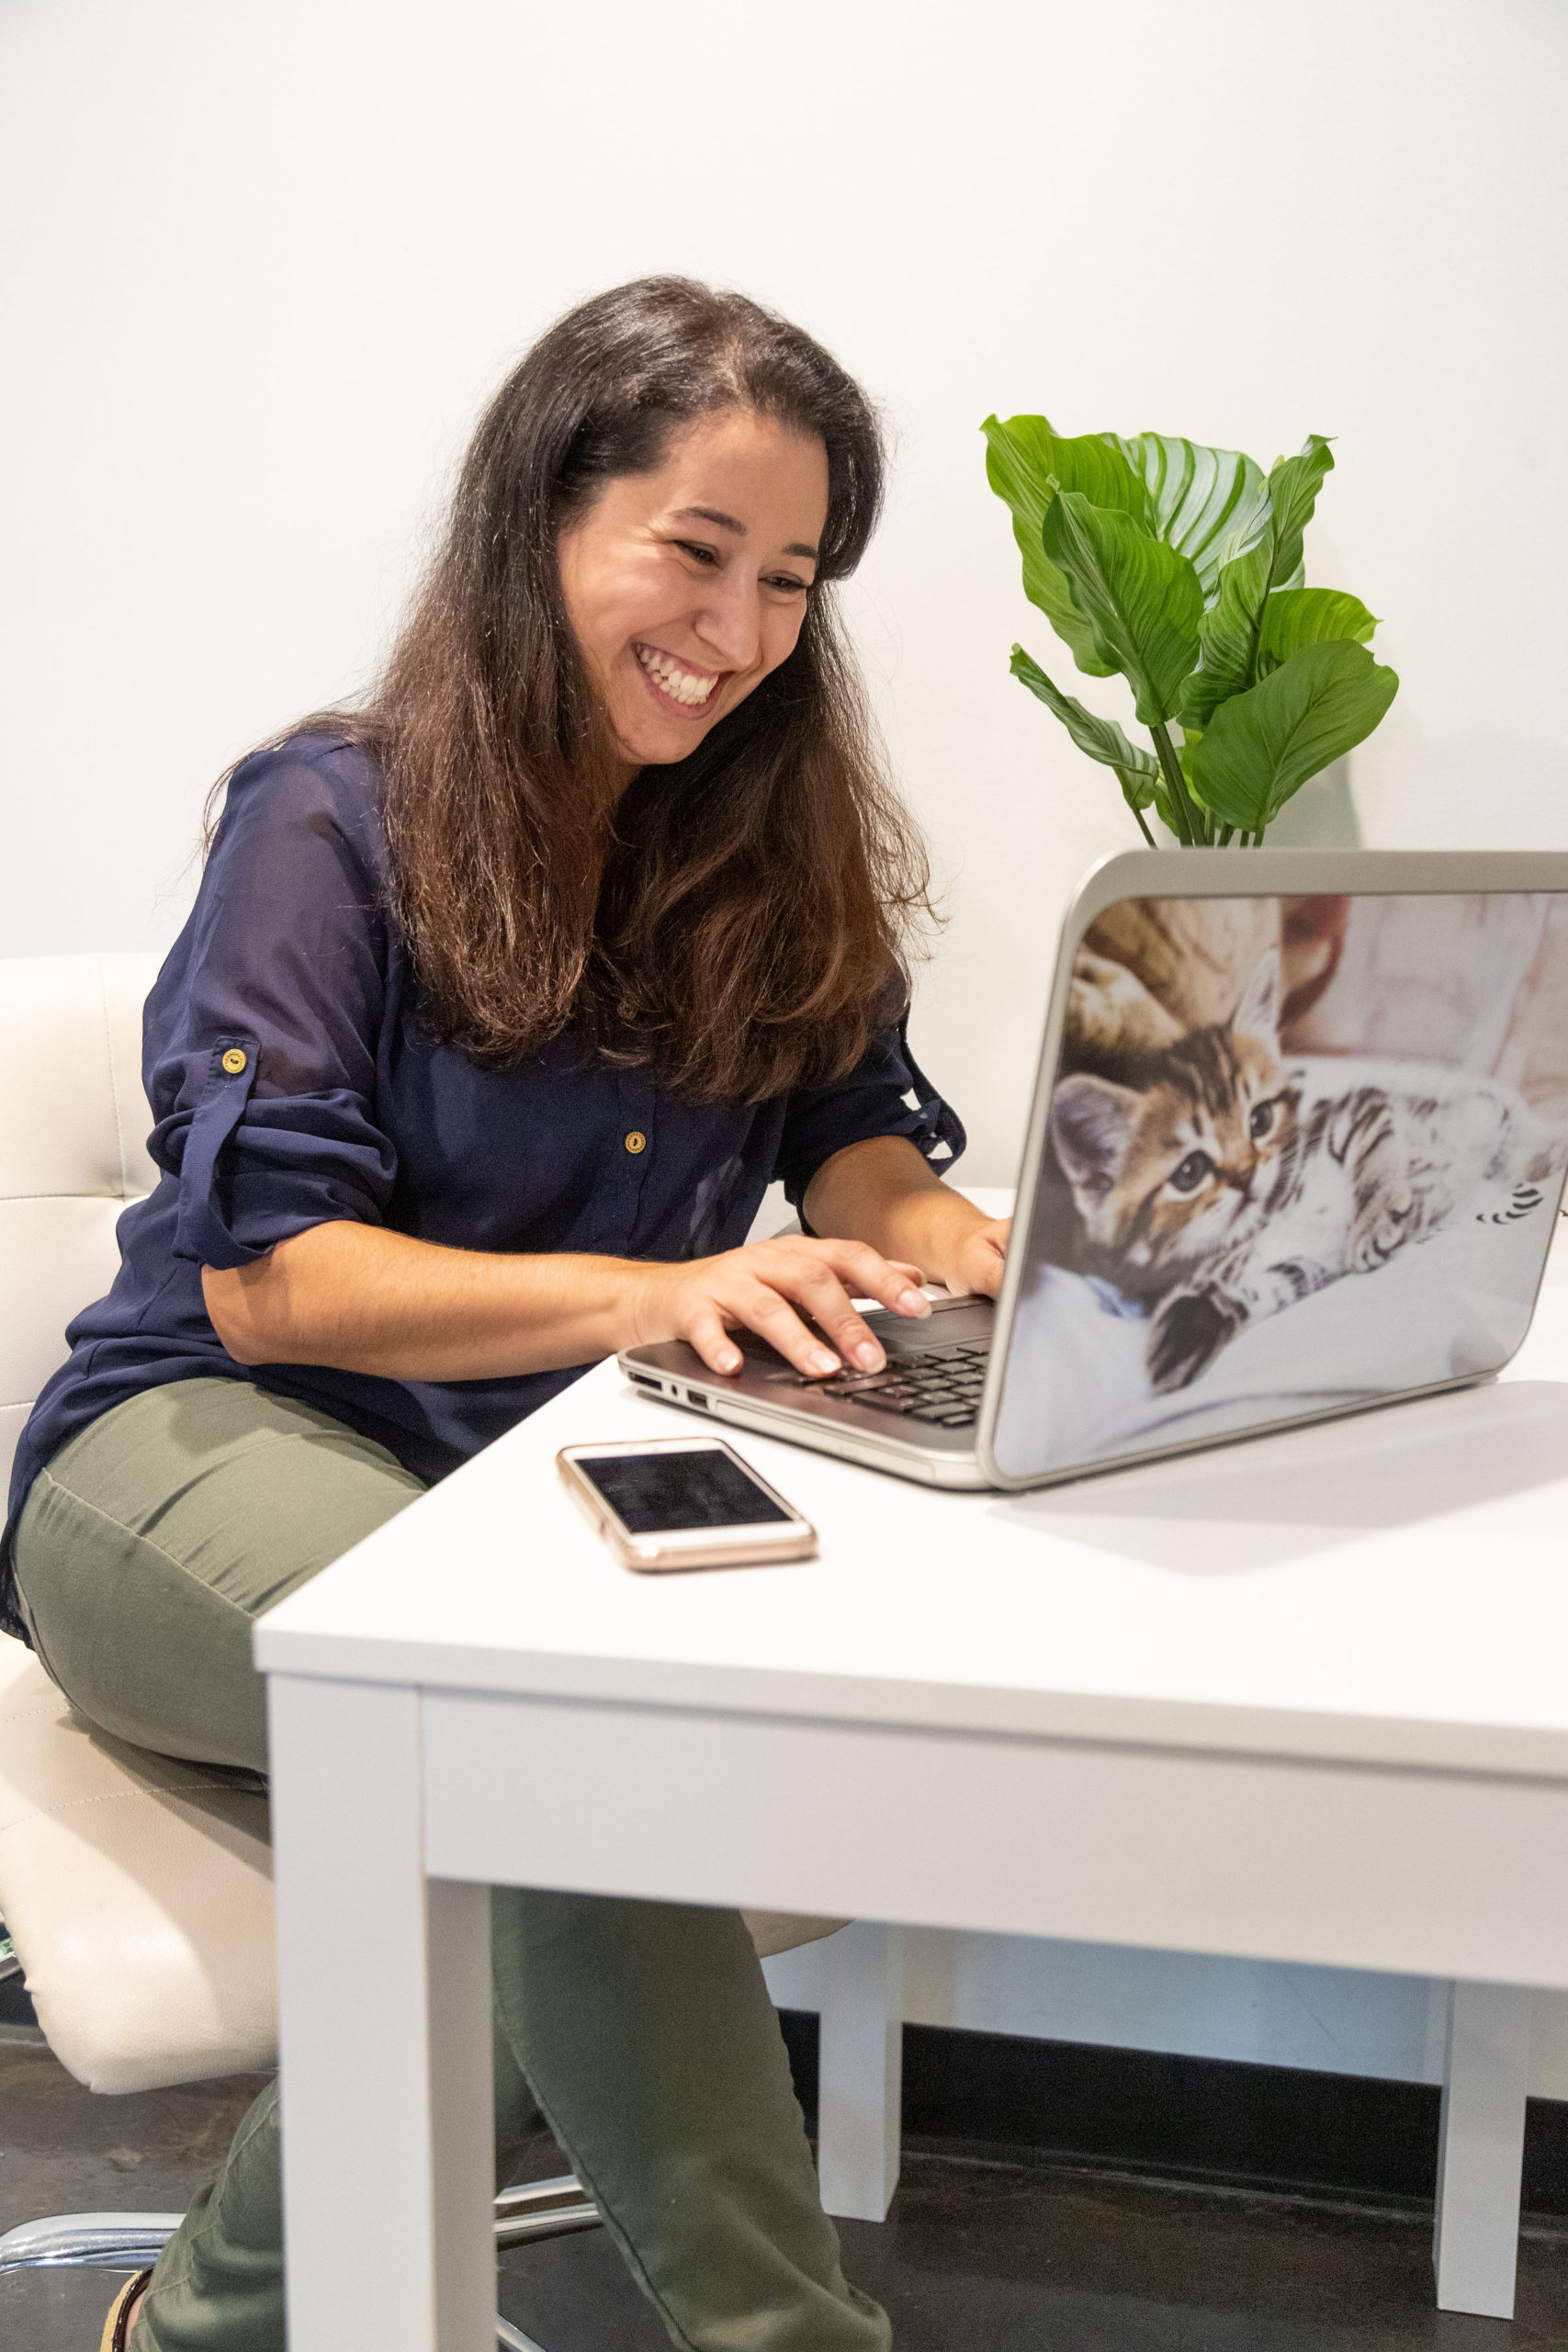 Instagram Coach Naty Montandon at her computer with a white desk and green plant